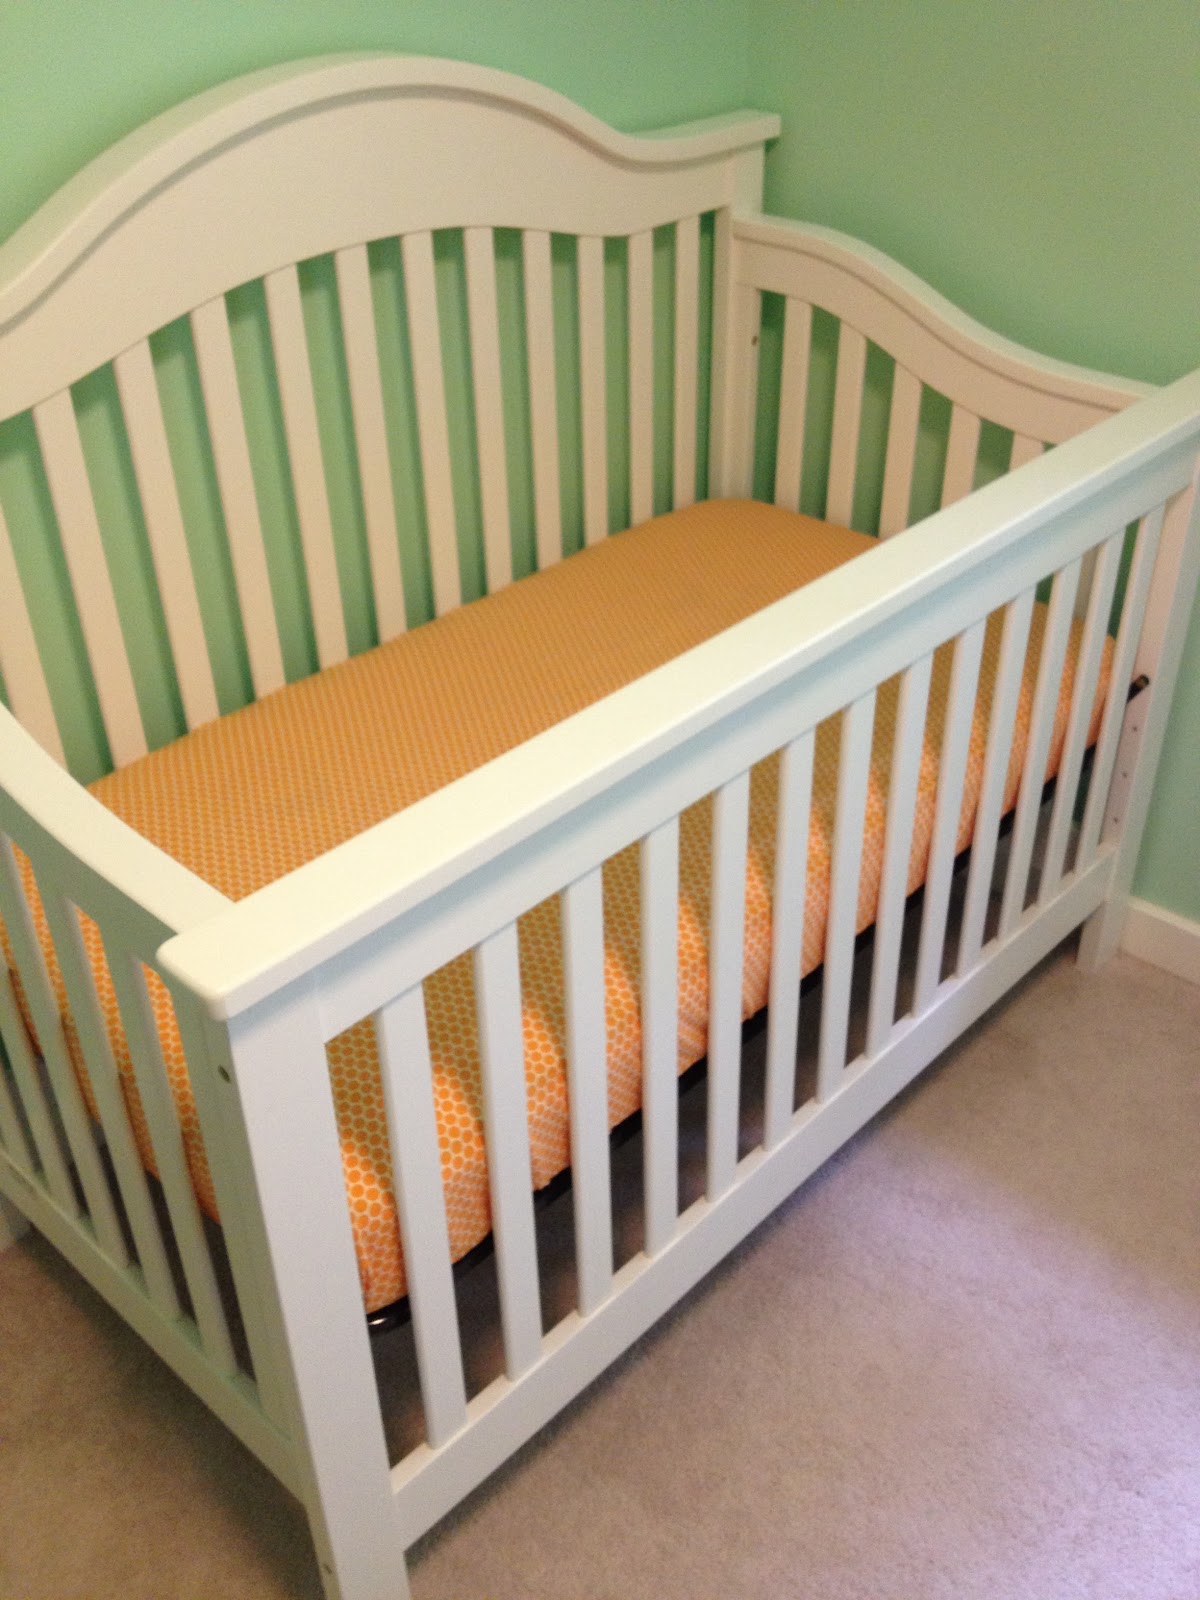 How to make a fitted sheet for a crib